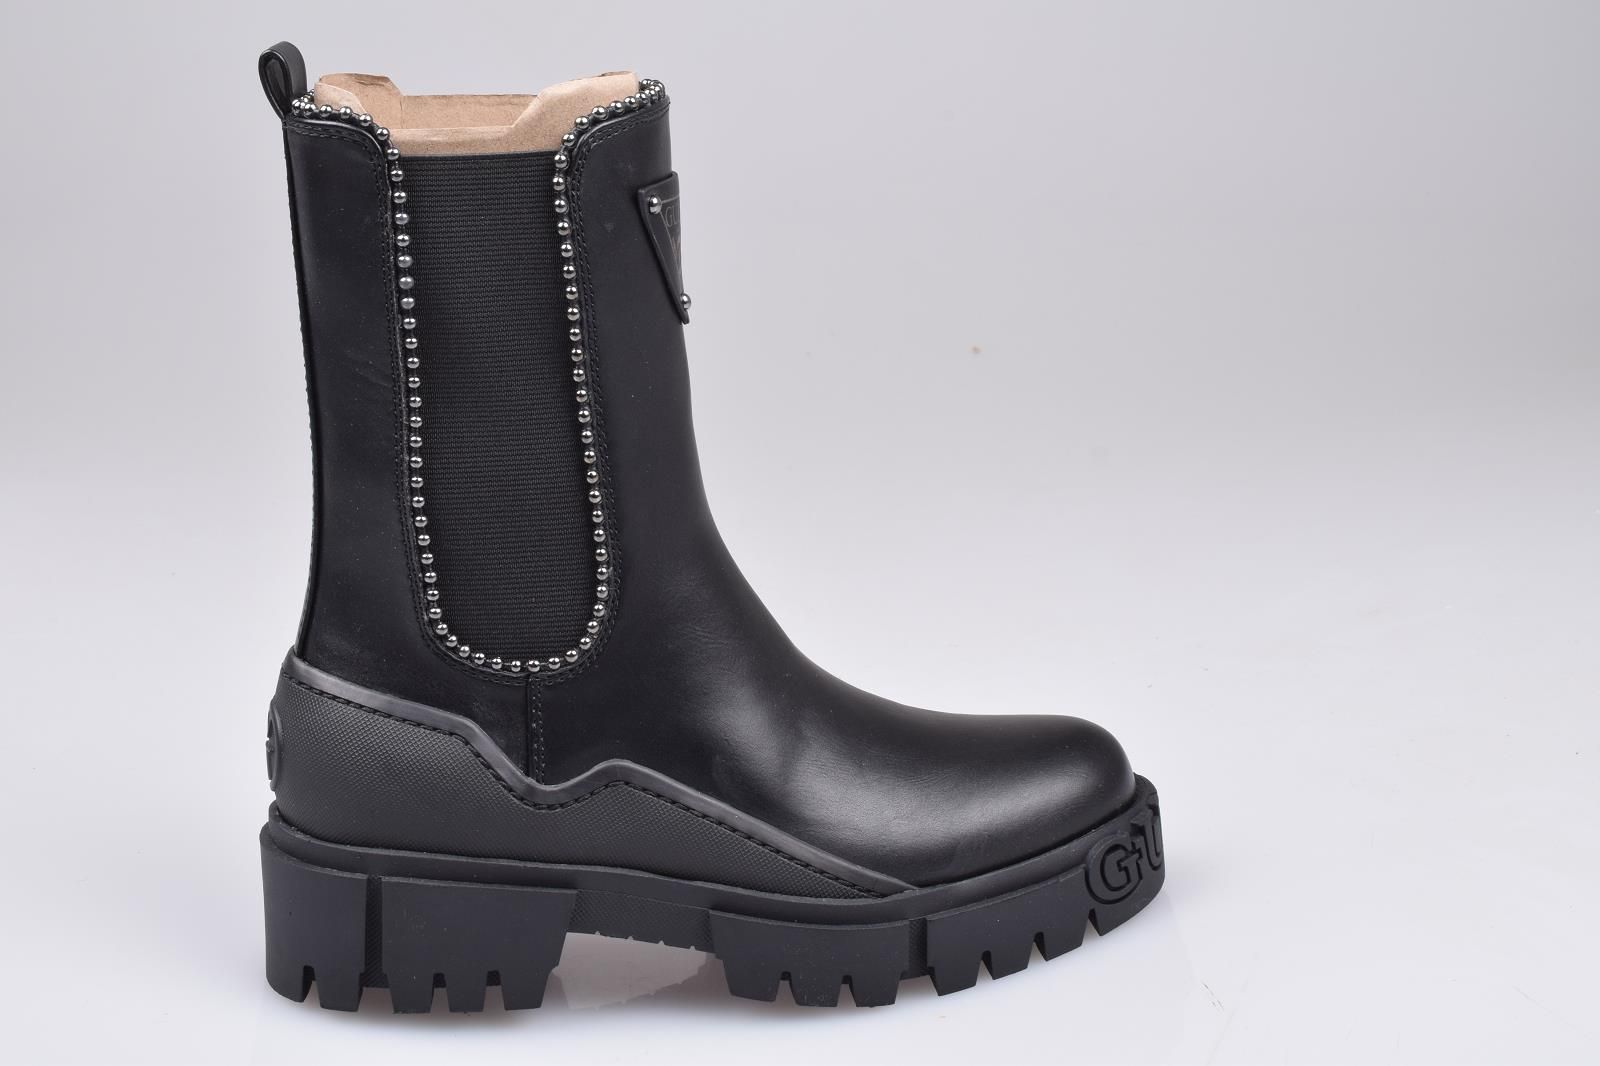 Guess Shoes 3/4 Laars Zwart dames (GUESS BOOT CHELSEA 3/4 - FL8NAHELE10 Black) - Mayday (Aalst)